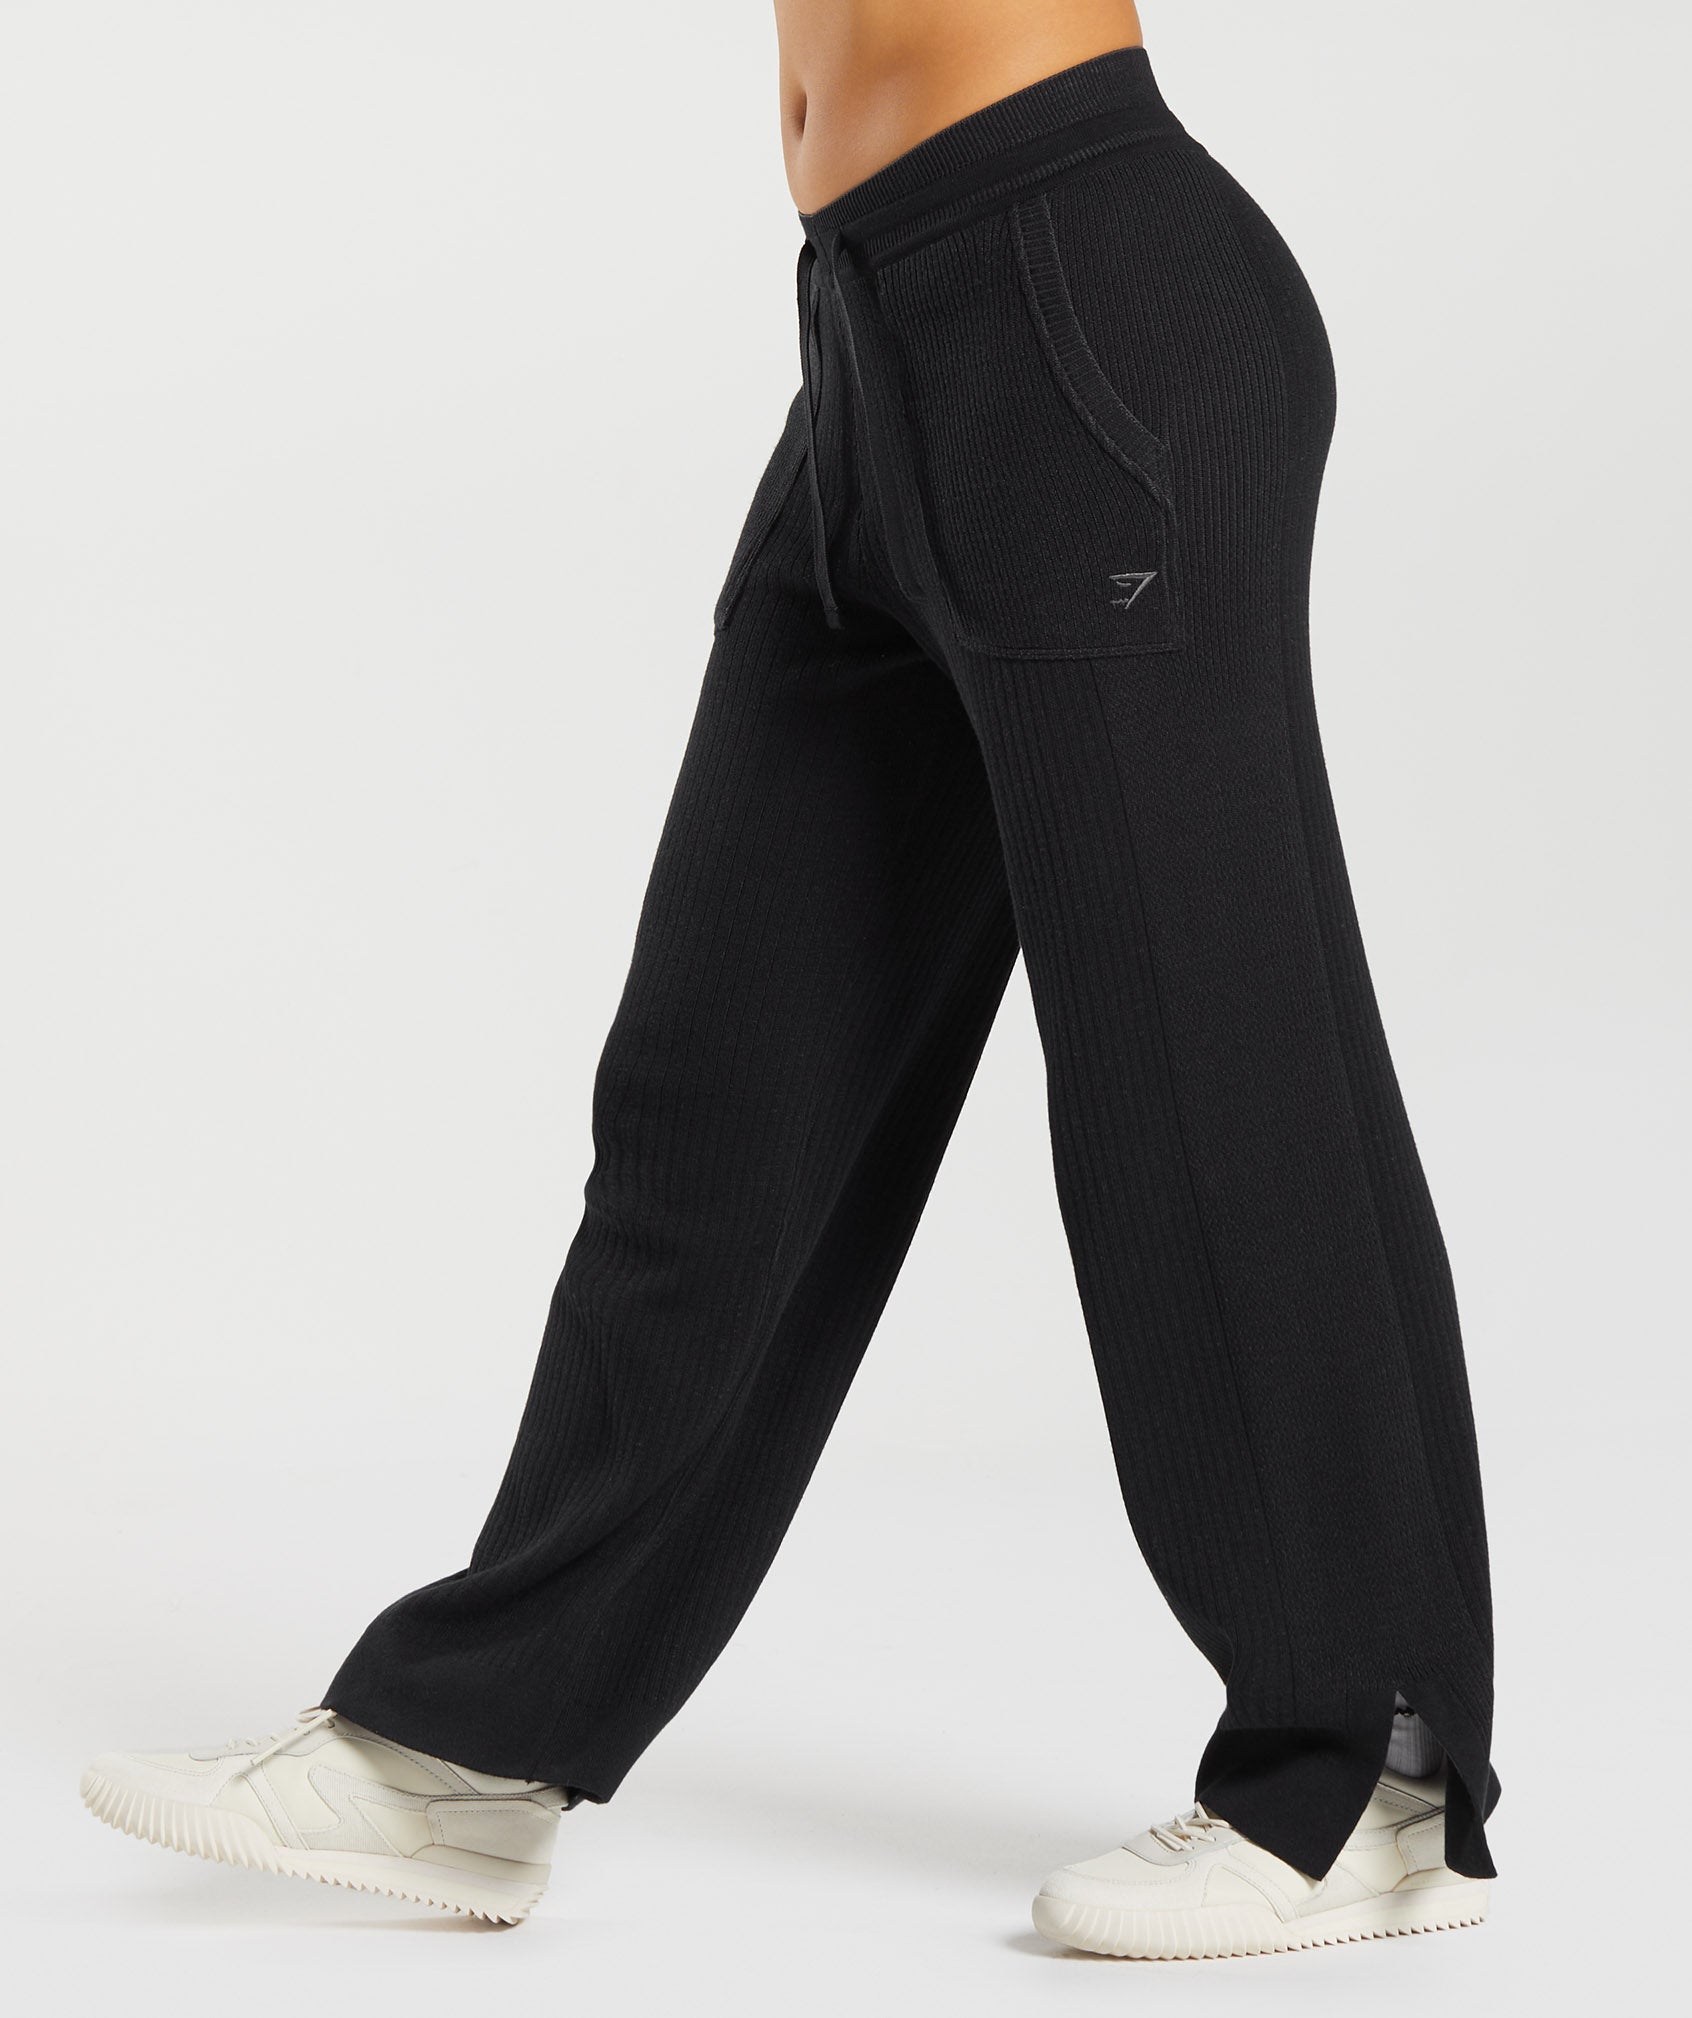 Pause Knitwear Joggers in Black/Onyx Grey - view 4